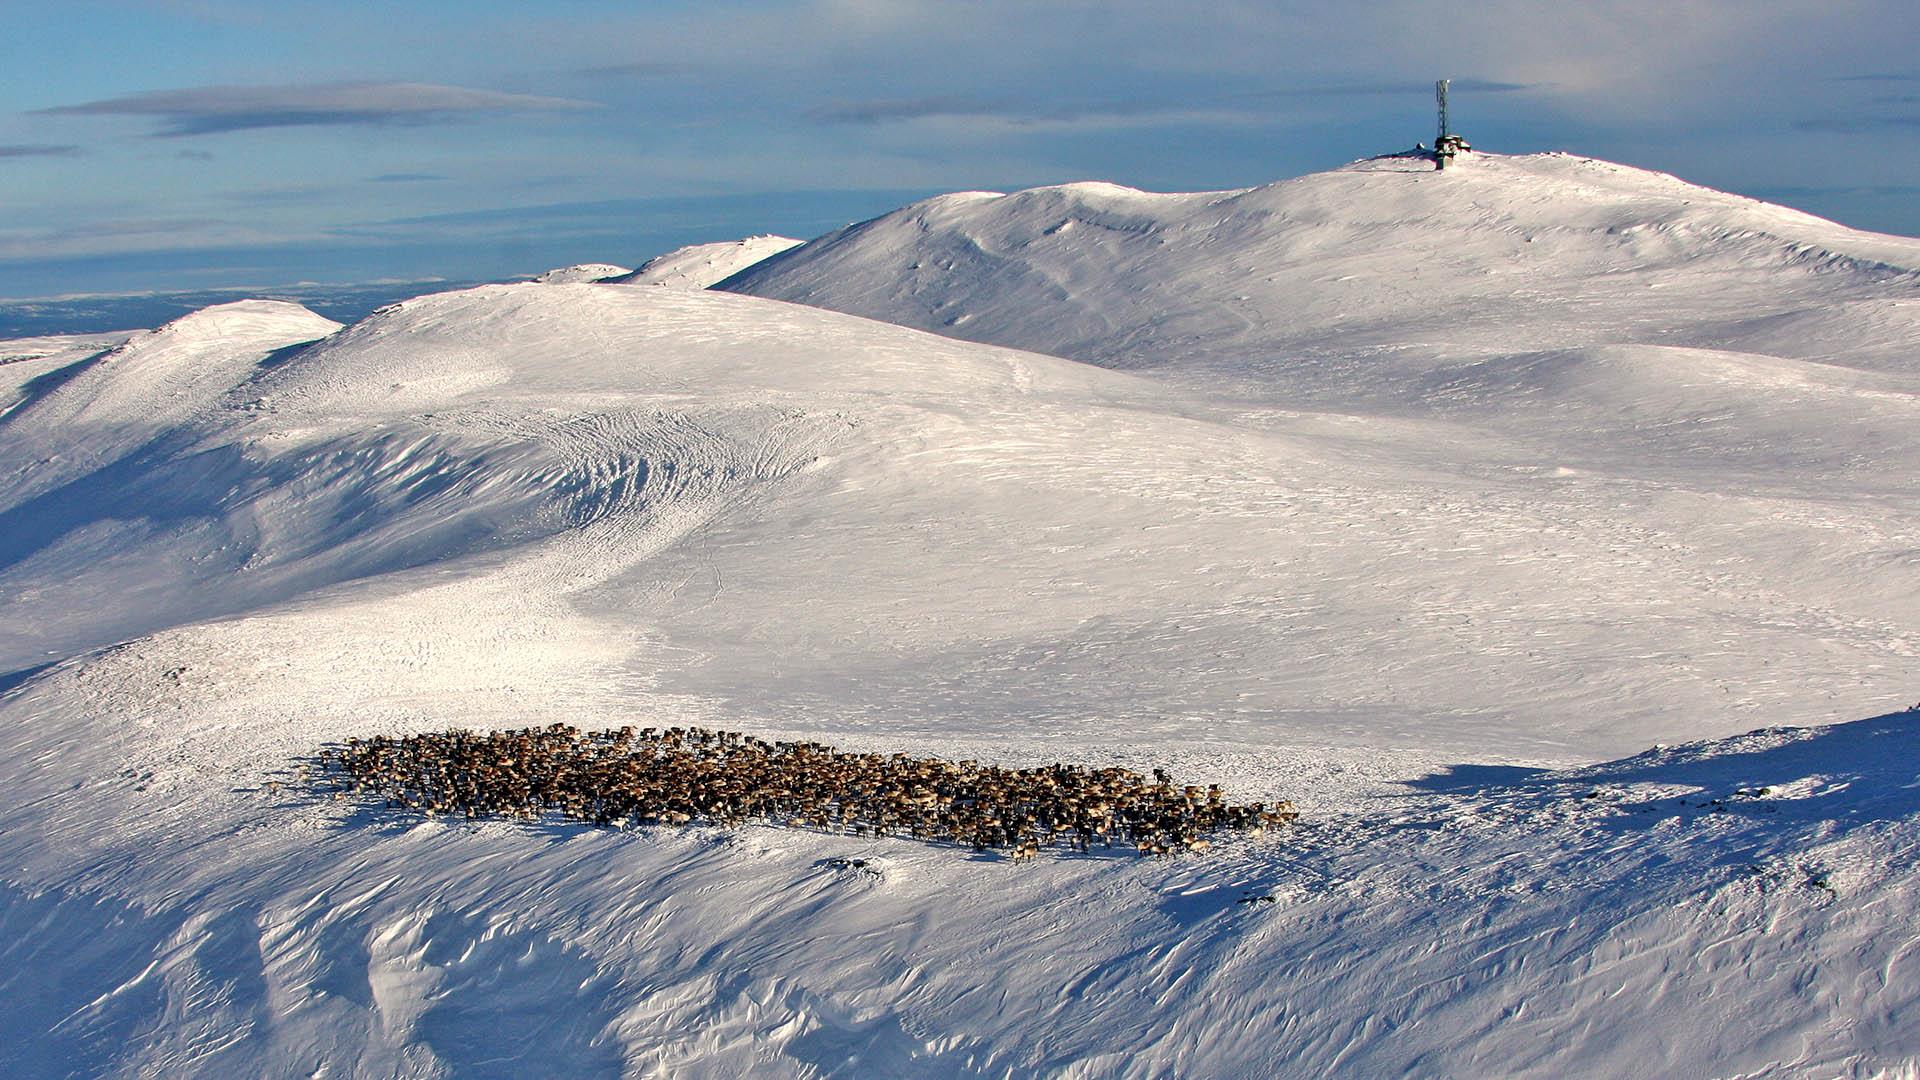 Winter picture over the mountain Spåtind in the background. In the foreground a large herd of reindeer.